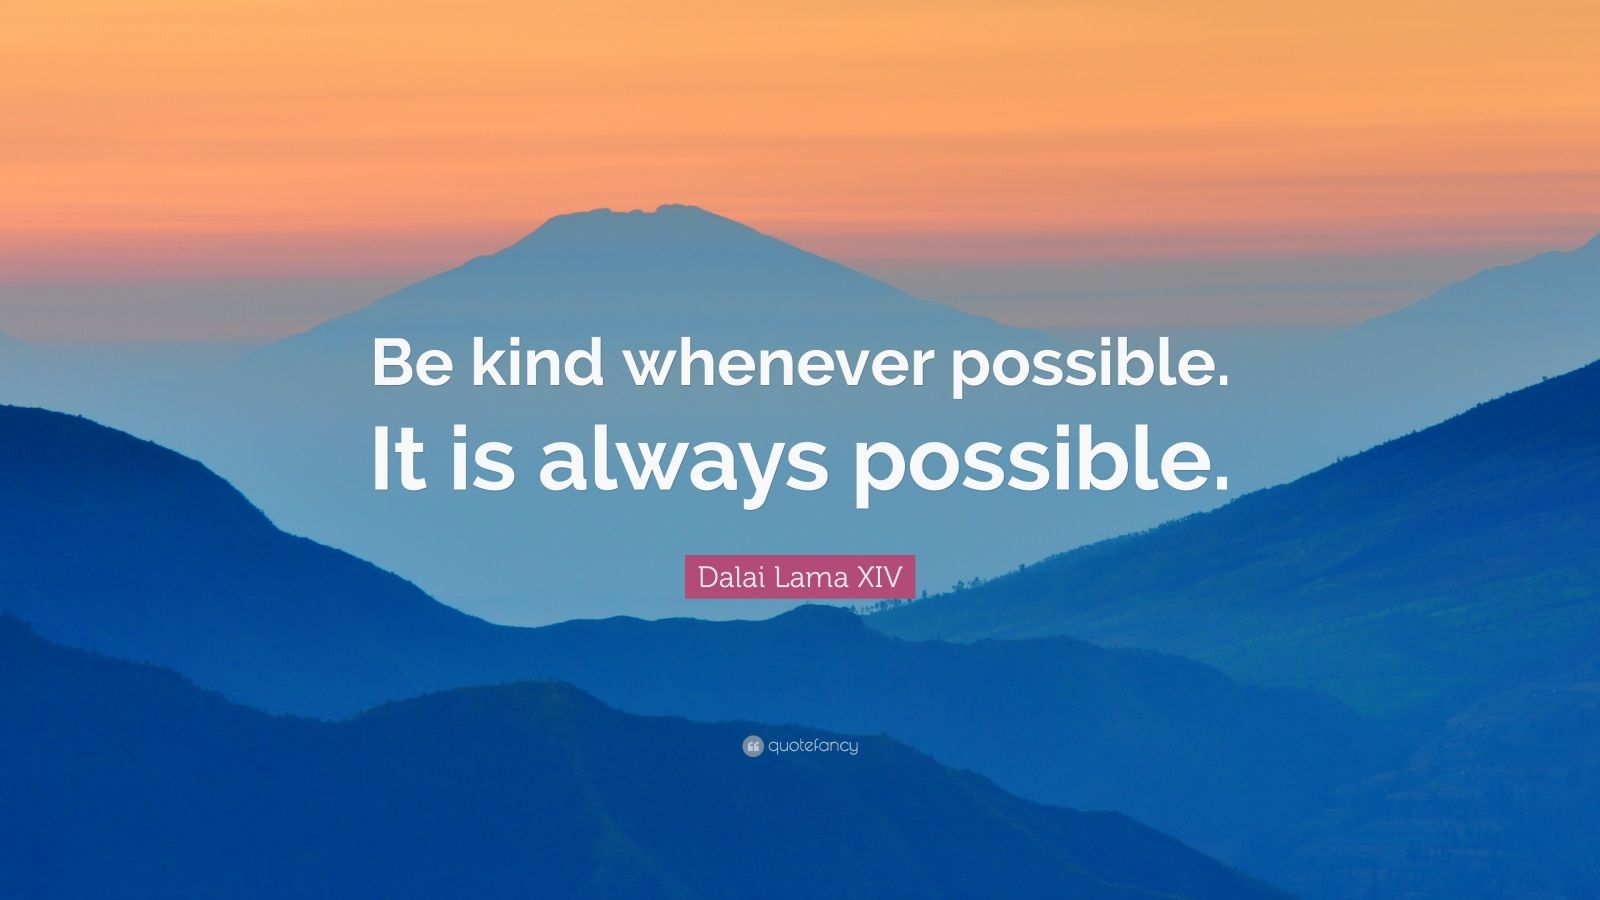 Dalai Lama XIV Quote: “Be kind whenever possible. It is always possible